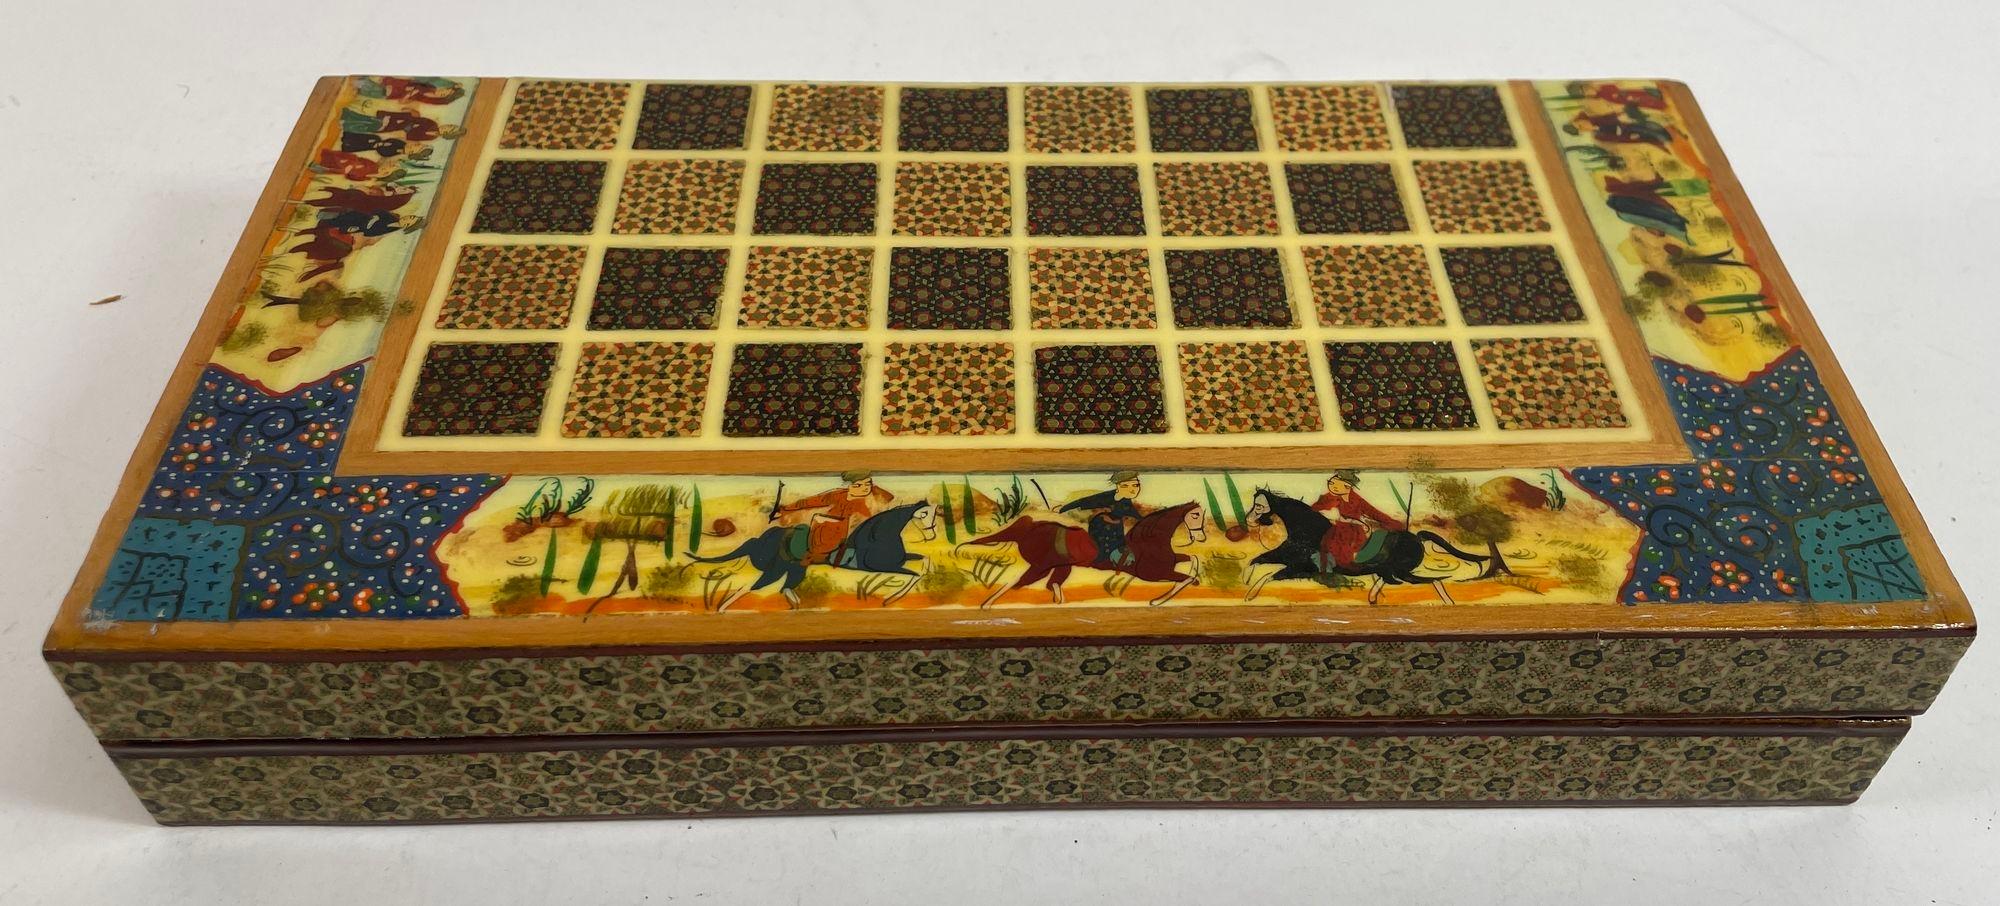 Vintage Persian Micro Mosaic Chess Game Box For Sale 2